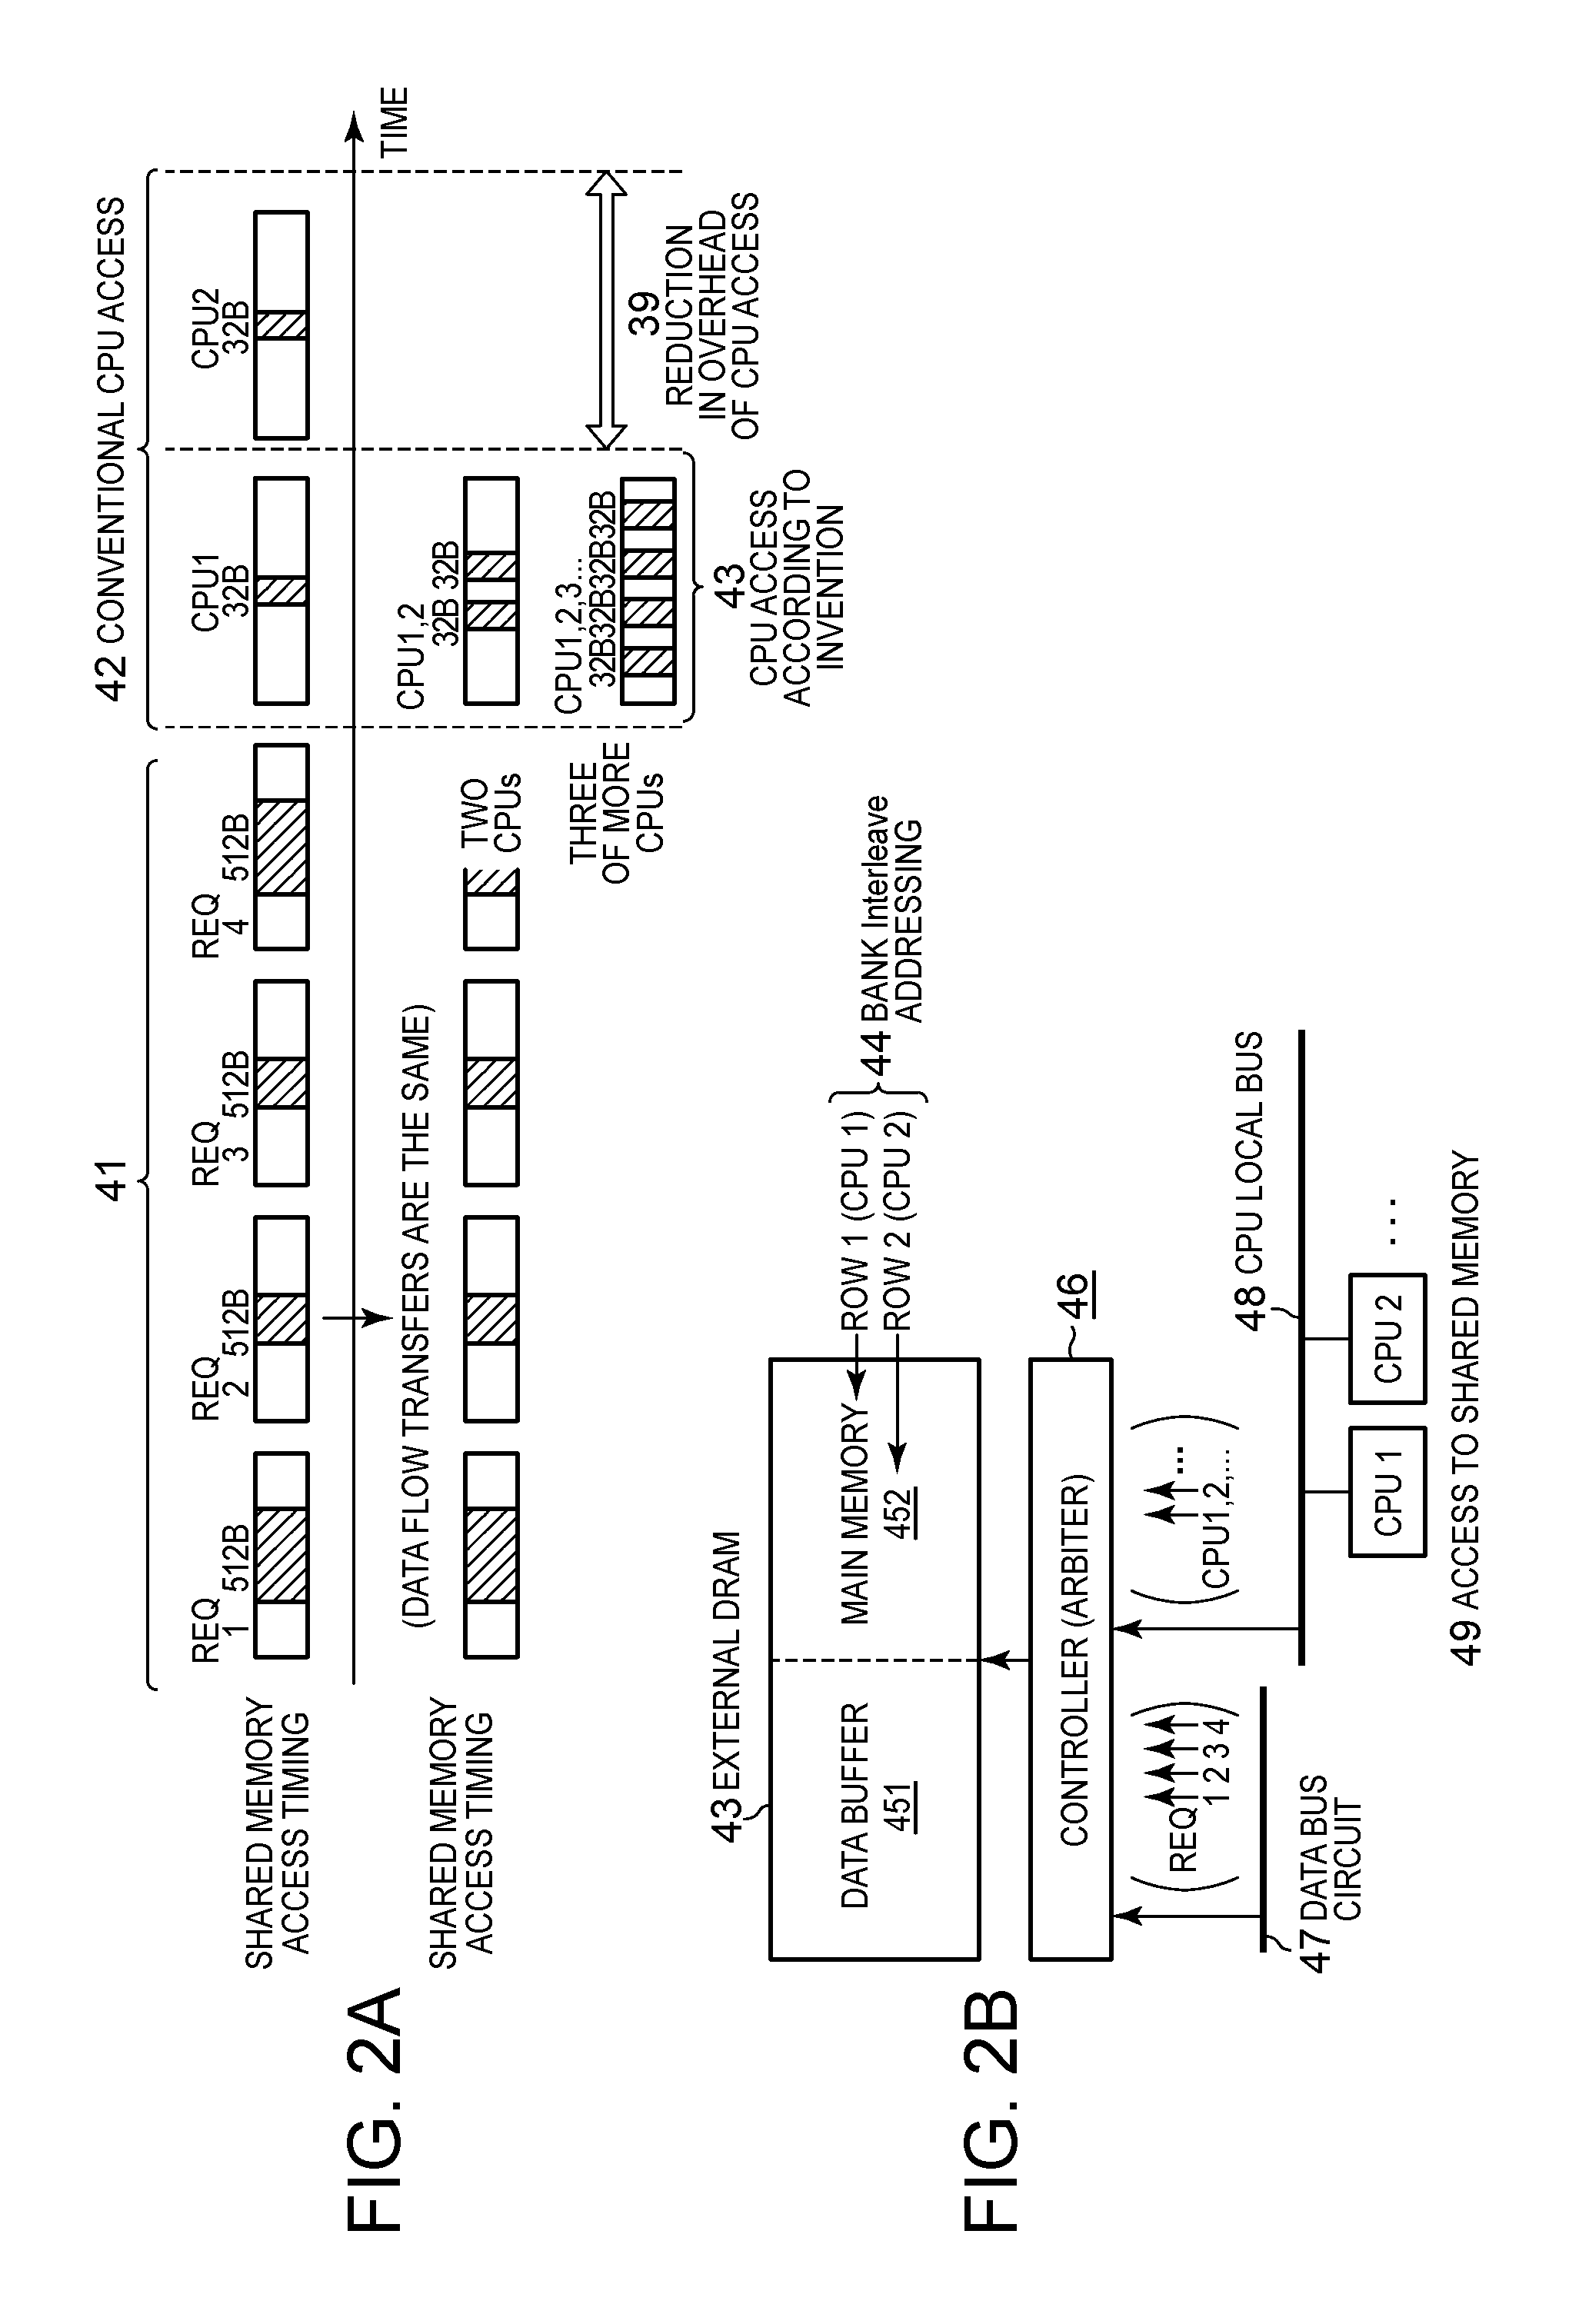 Holding by a memory controller multiple central processing unit memory access requests, and performing the multiple central processing unit memory requests in one transfer cycle